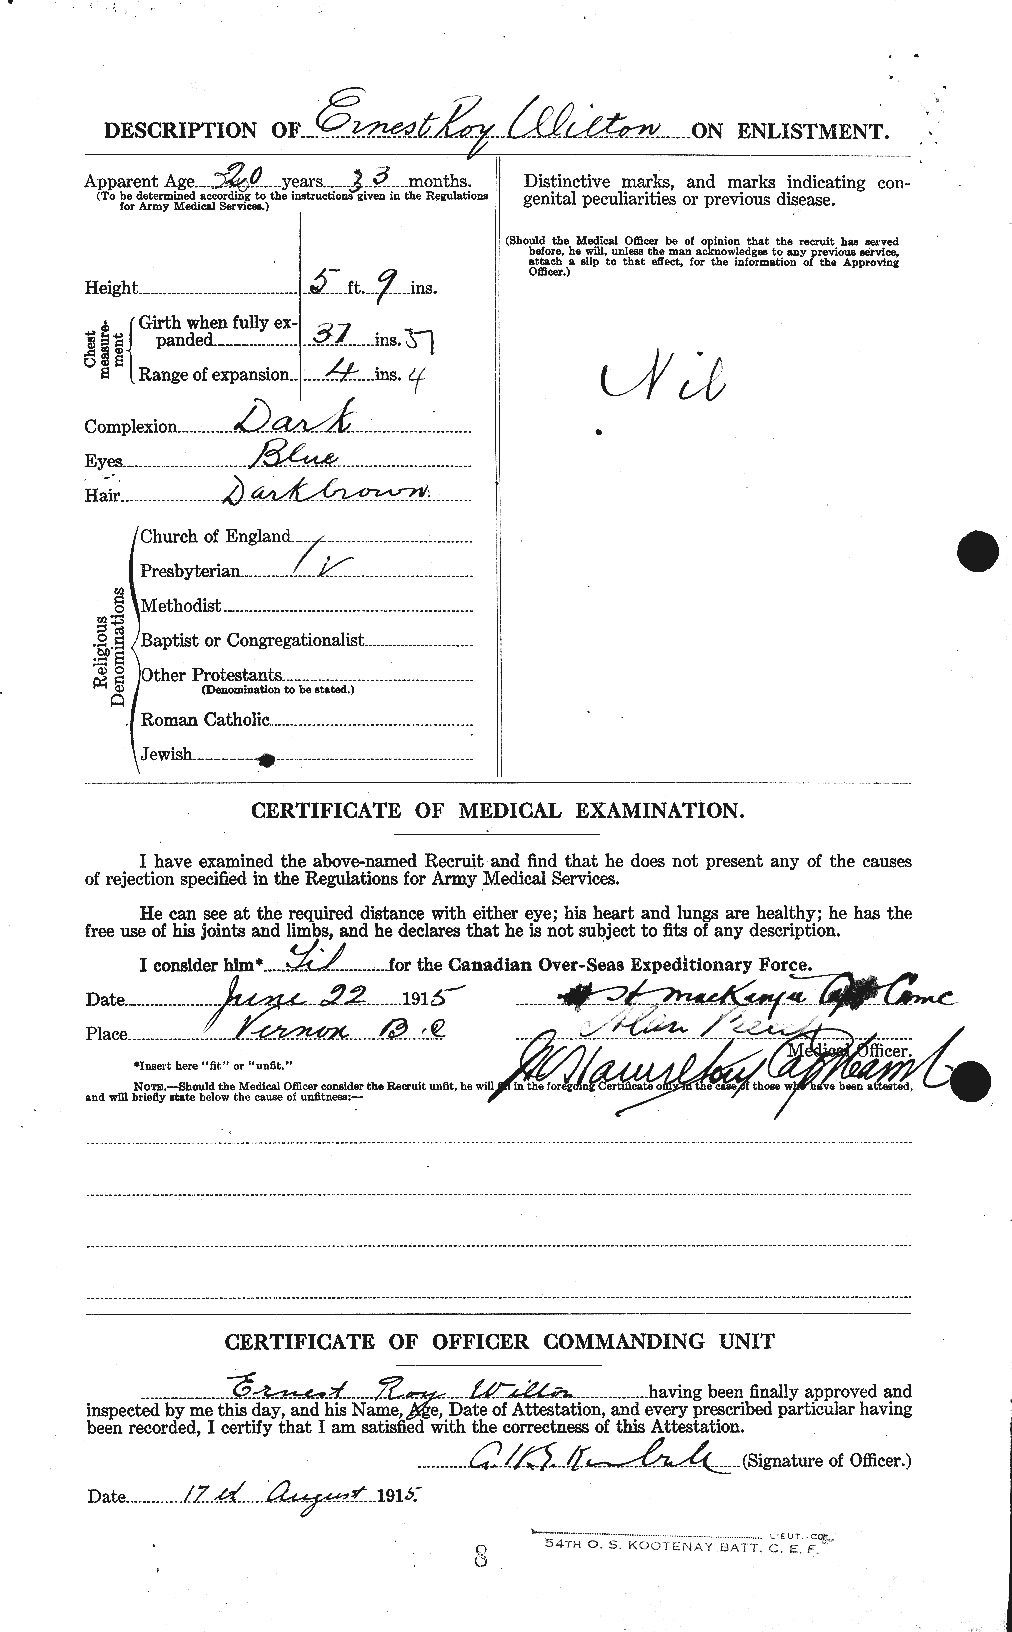 Personnel Records of the First World War - CEF 684148b